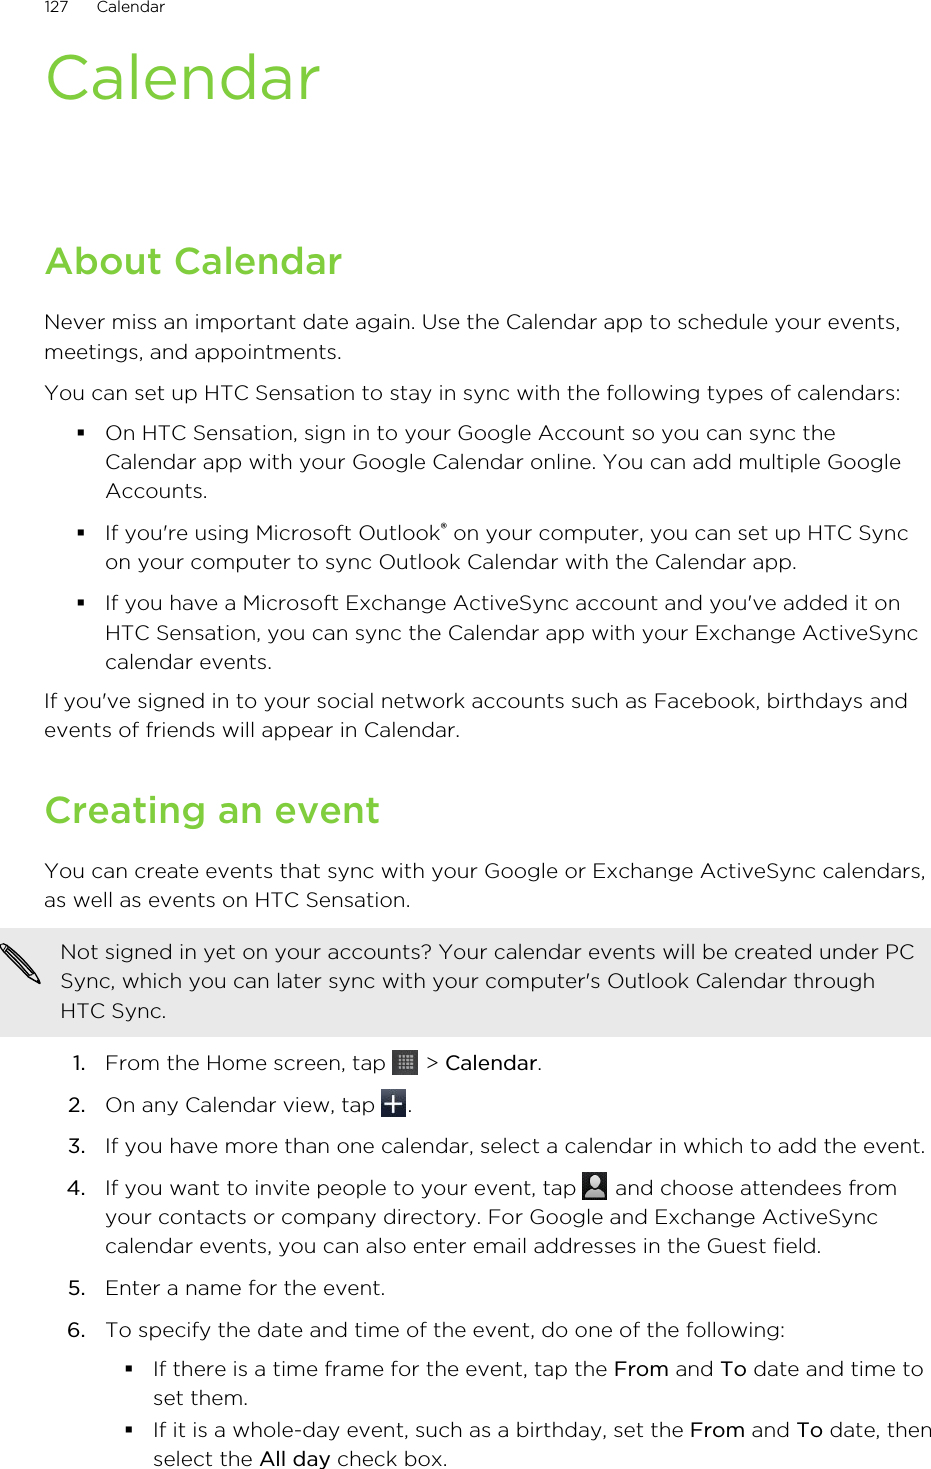 CalendarAbout CalendarNever miss an important date again. Use the Calendar app to schedule your events,meetings, and appointments.You can set up HTC Sensation to stay in sync with the following types of calendars:§On HTC Sensation, sign in to your Google Account so you can sync theCalendar app with your Google Calendar online. You can add multiple GoogleAccounts.§If you&apos;re using Microsoft Outlook® on your computer, you can set up HTC Syncon your computer to sync Outlook Calendar with the Calendar app.§If you have a Microsoft Exchange ActiveSync account and you&apos;ve added it onHTC Sensation, you can sync the Calendar app with your Exchange ActiveSynccalendar events.If you&apos;ve signed in to your social network accounts such as Facebook, birthdays andevents of friends will appear in Calendar.Creating an eventYou can create events that sync with your Google or Exchange ActiveSync calendars,as well as events on HTC Sensation.Not signed in yet on your accounts? Your calendar events will be created under PCSync, which you can later sync with your computer&apos;s Outlook Calendar throughHTC Sync.1. From the Home screen, tap   &gt; Calendar.2. On any Calendar view, tap  .3. If you have more than one calendar, select a calendar in which to add the event.4. If you want to invite people to your event, tap   and choose attendees fromyour contacts or company directory. For Google and Exchange ActiveSynccalendar events, you can also enter email addresses in the Guest field.5. Enter a name for the event.6. To specify the date and time of the event, do one of the following:§If there is a time frame for the event, tap the From and To date and time toset them.§If it is a whole-day event, such as a birthday, set the From and To date, thenselect the All day check box.127 Calendar